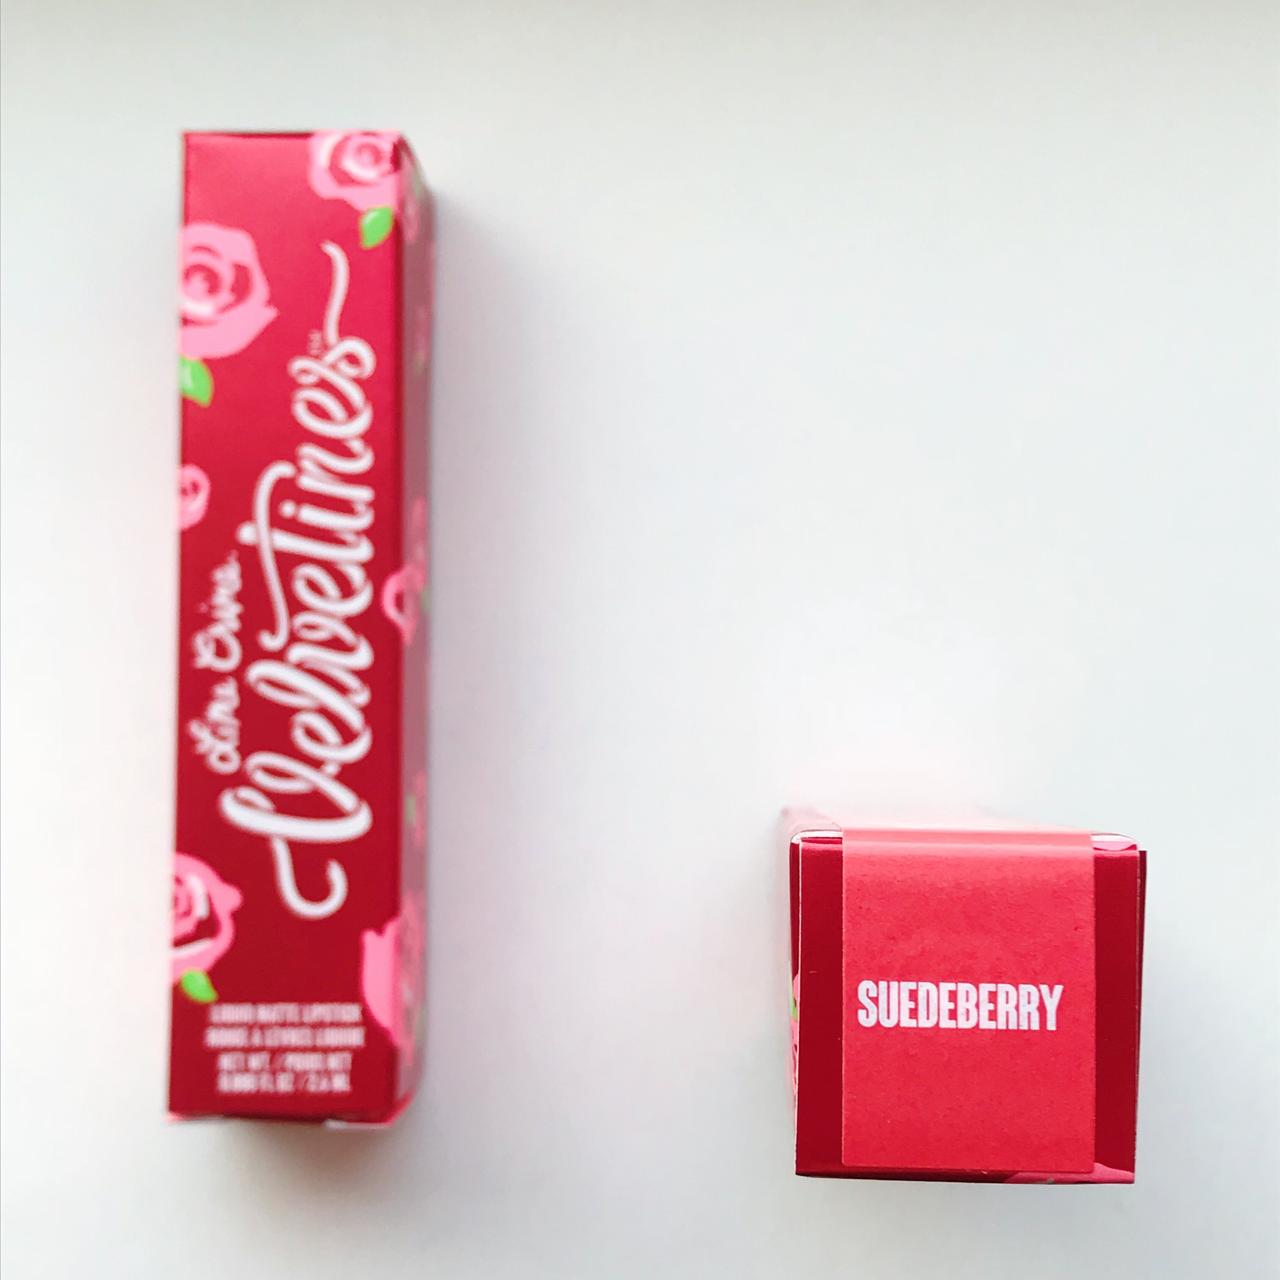 Product Image 1 - Lime Crime Velvetine in Suedeberry.